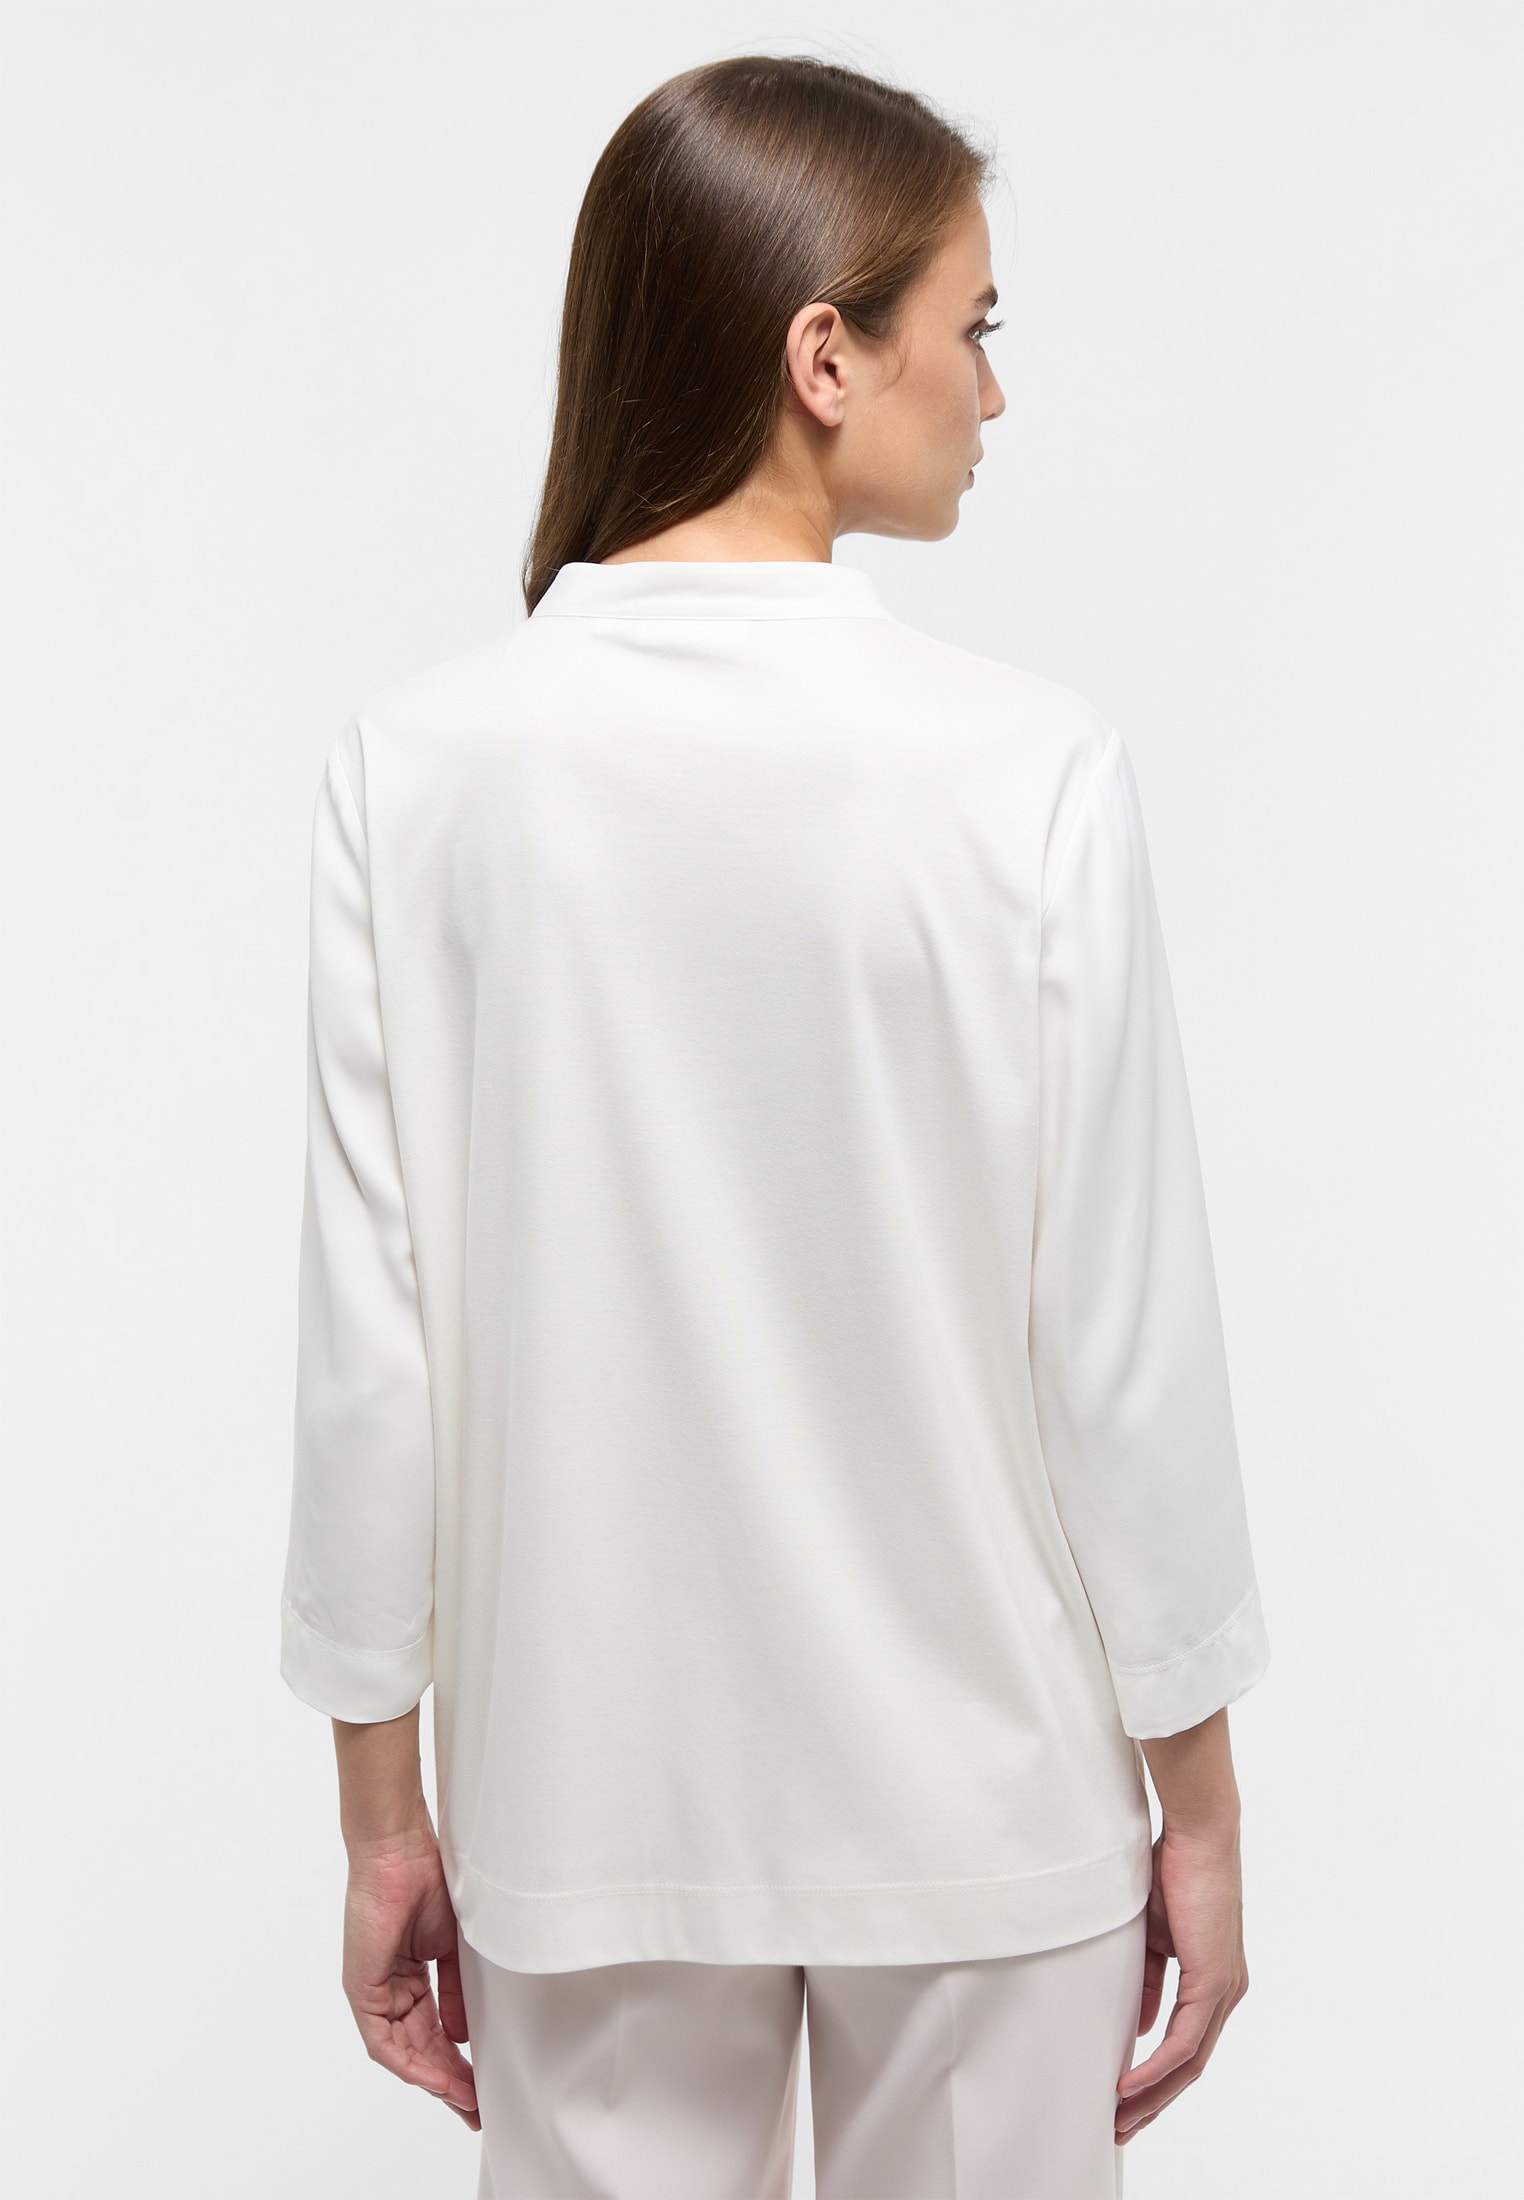 Bluse | off-white 3/4-Arm 2BL04358-00-02-46-3/4 Shirt Viscose | 46 unifarben | | off-white in